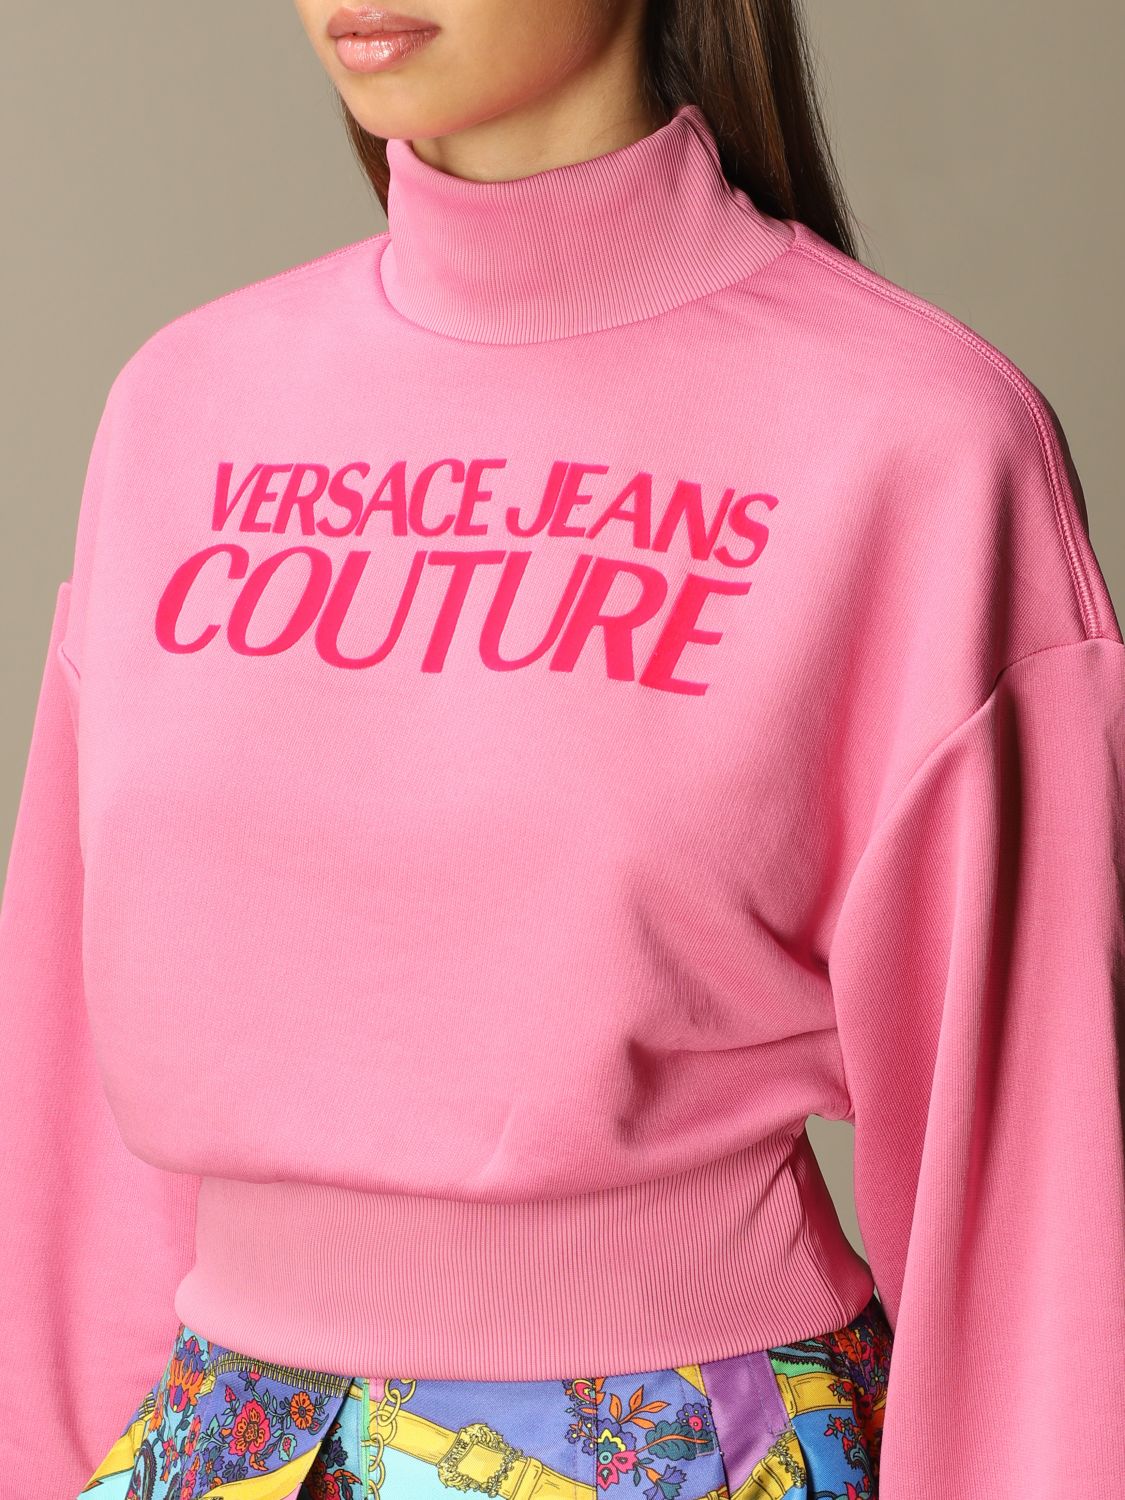 pink versace jeans